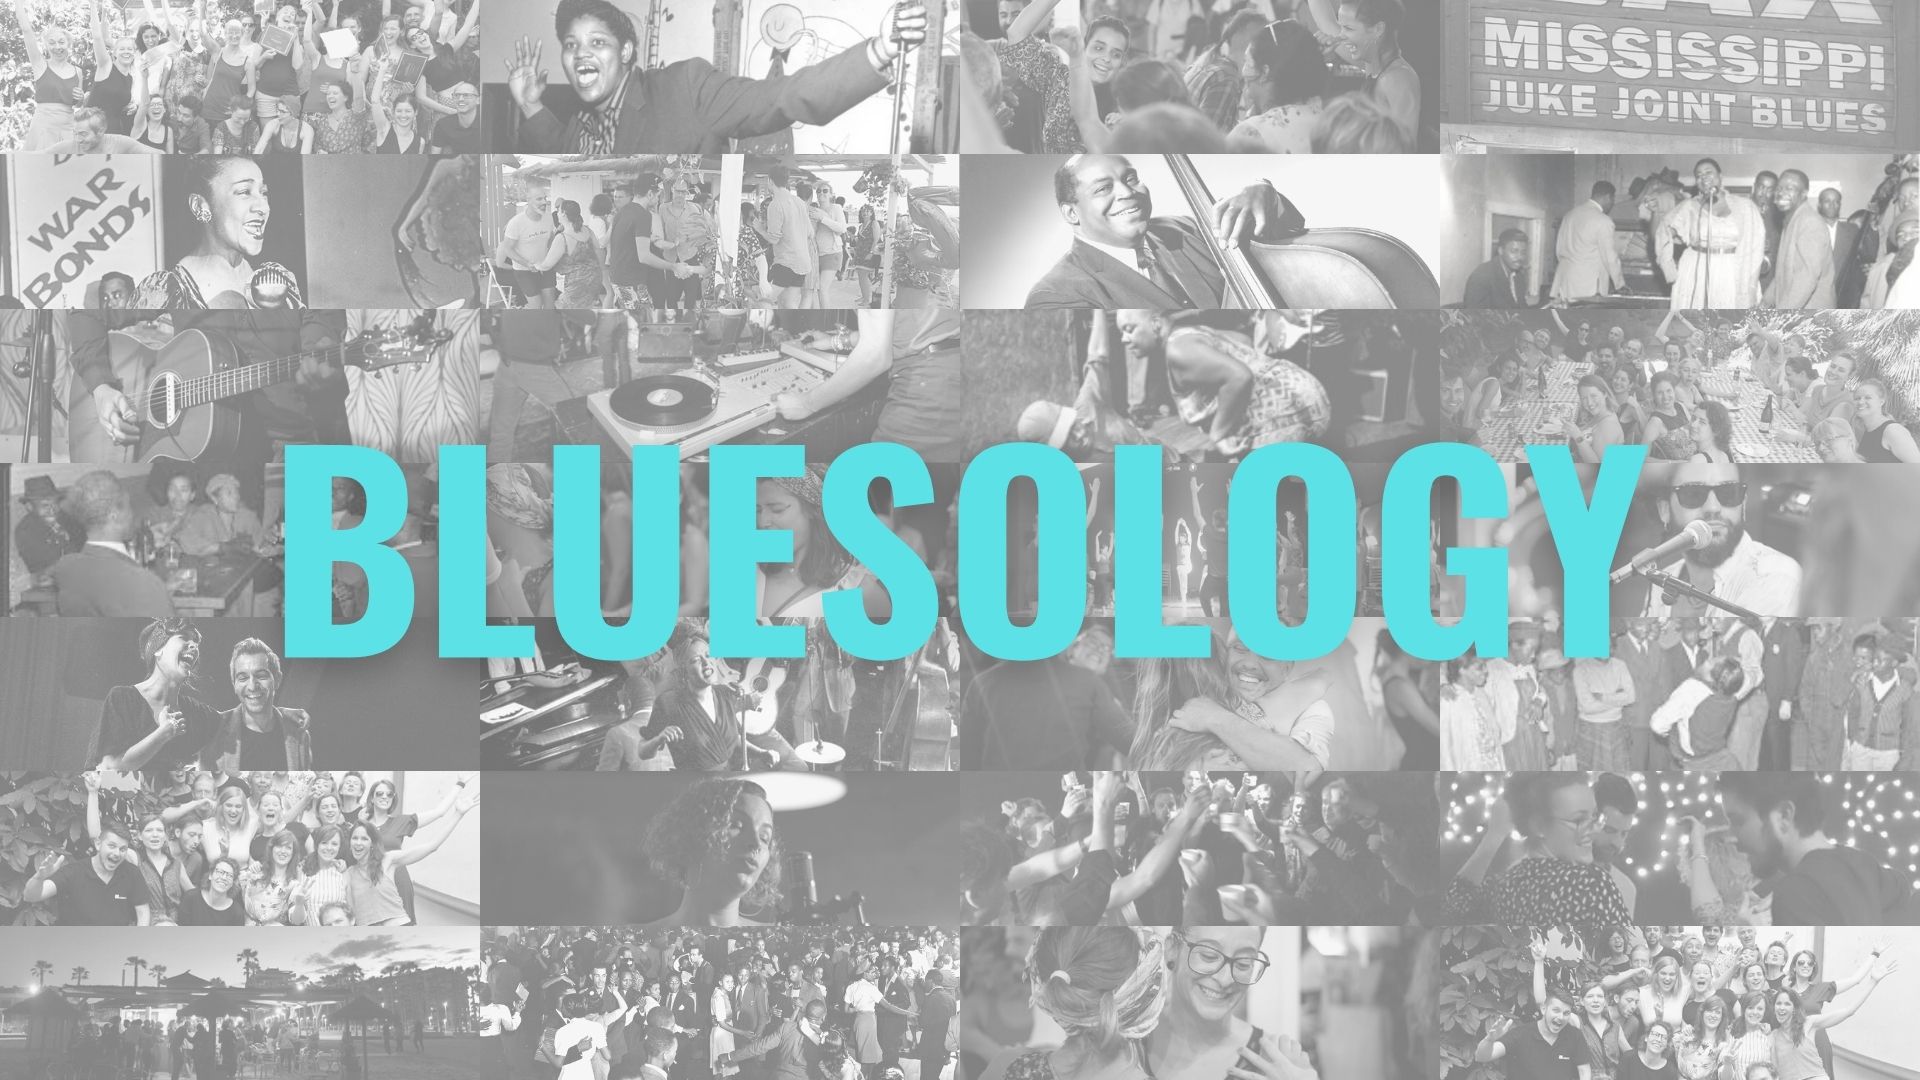 Bluesology - Events - The Blues Room